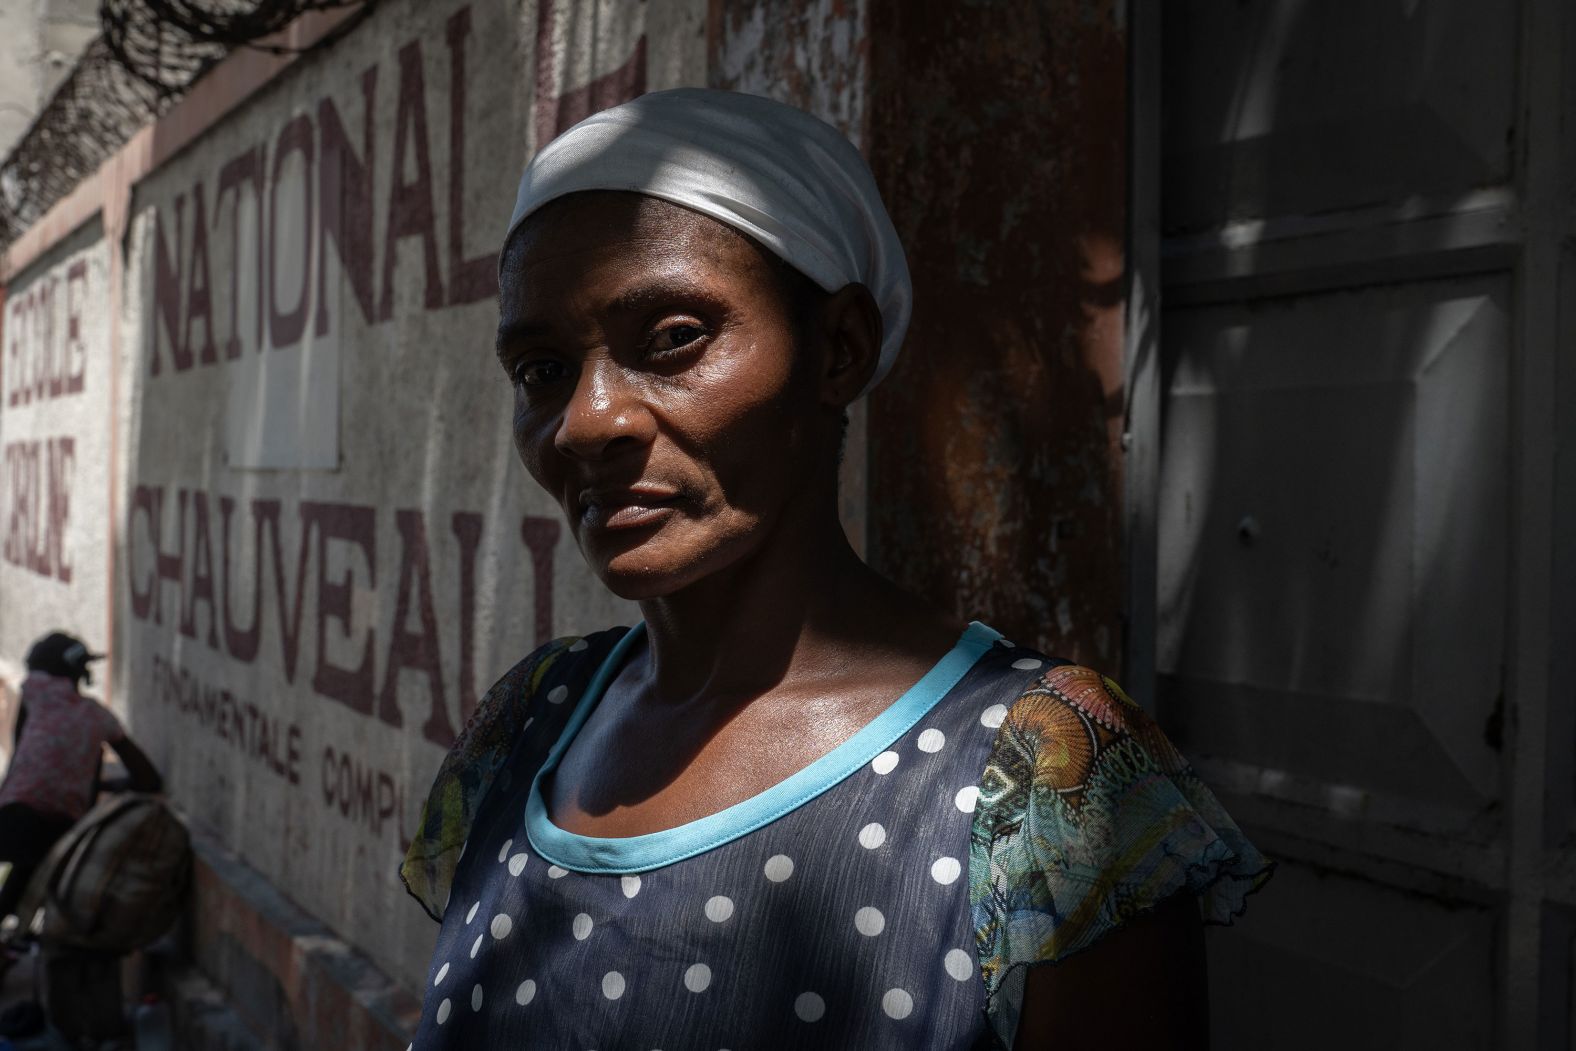 A Haitian woman waits for other family members at a settlement that was a former school in Port-au-Prince.